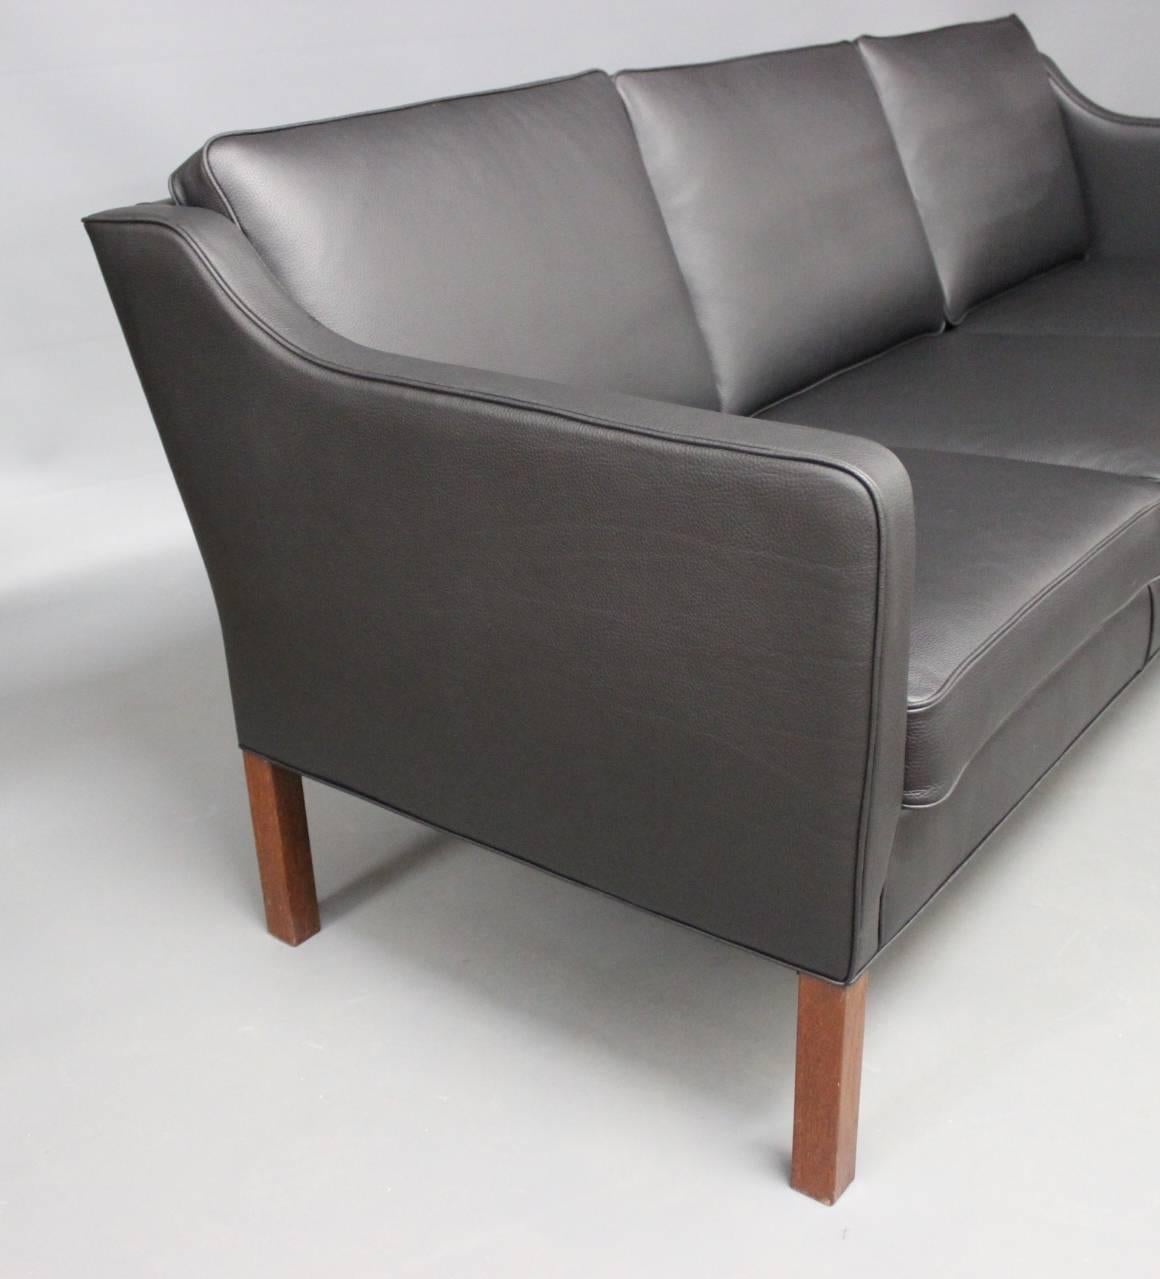 2209 BM three-seat sofa in black leather designed by Børge Mogensen in 1963 and manufactured by Fredericia Furniture in the 1970s, newly upholstered in black classic leather.